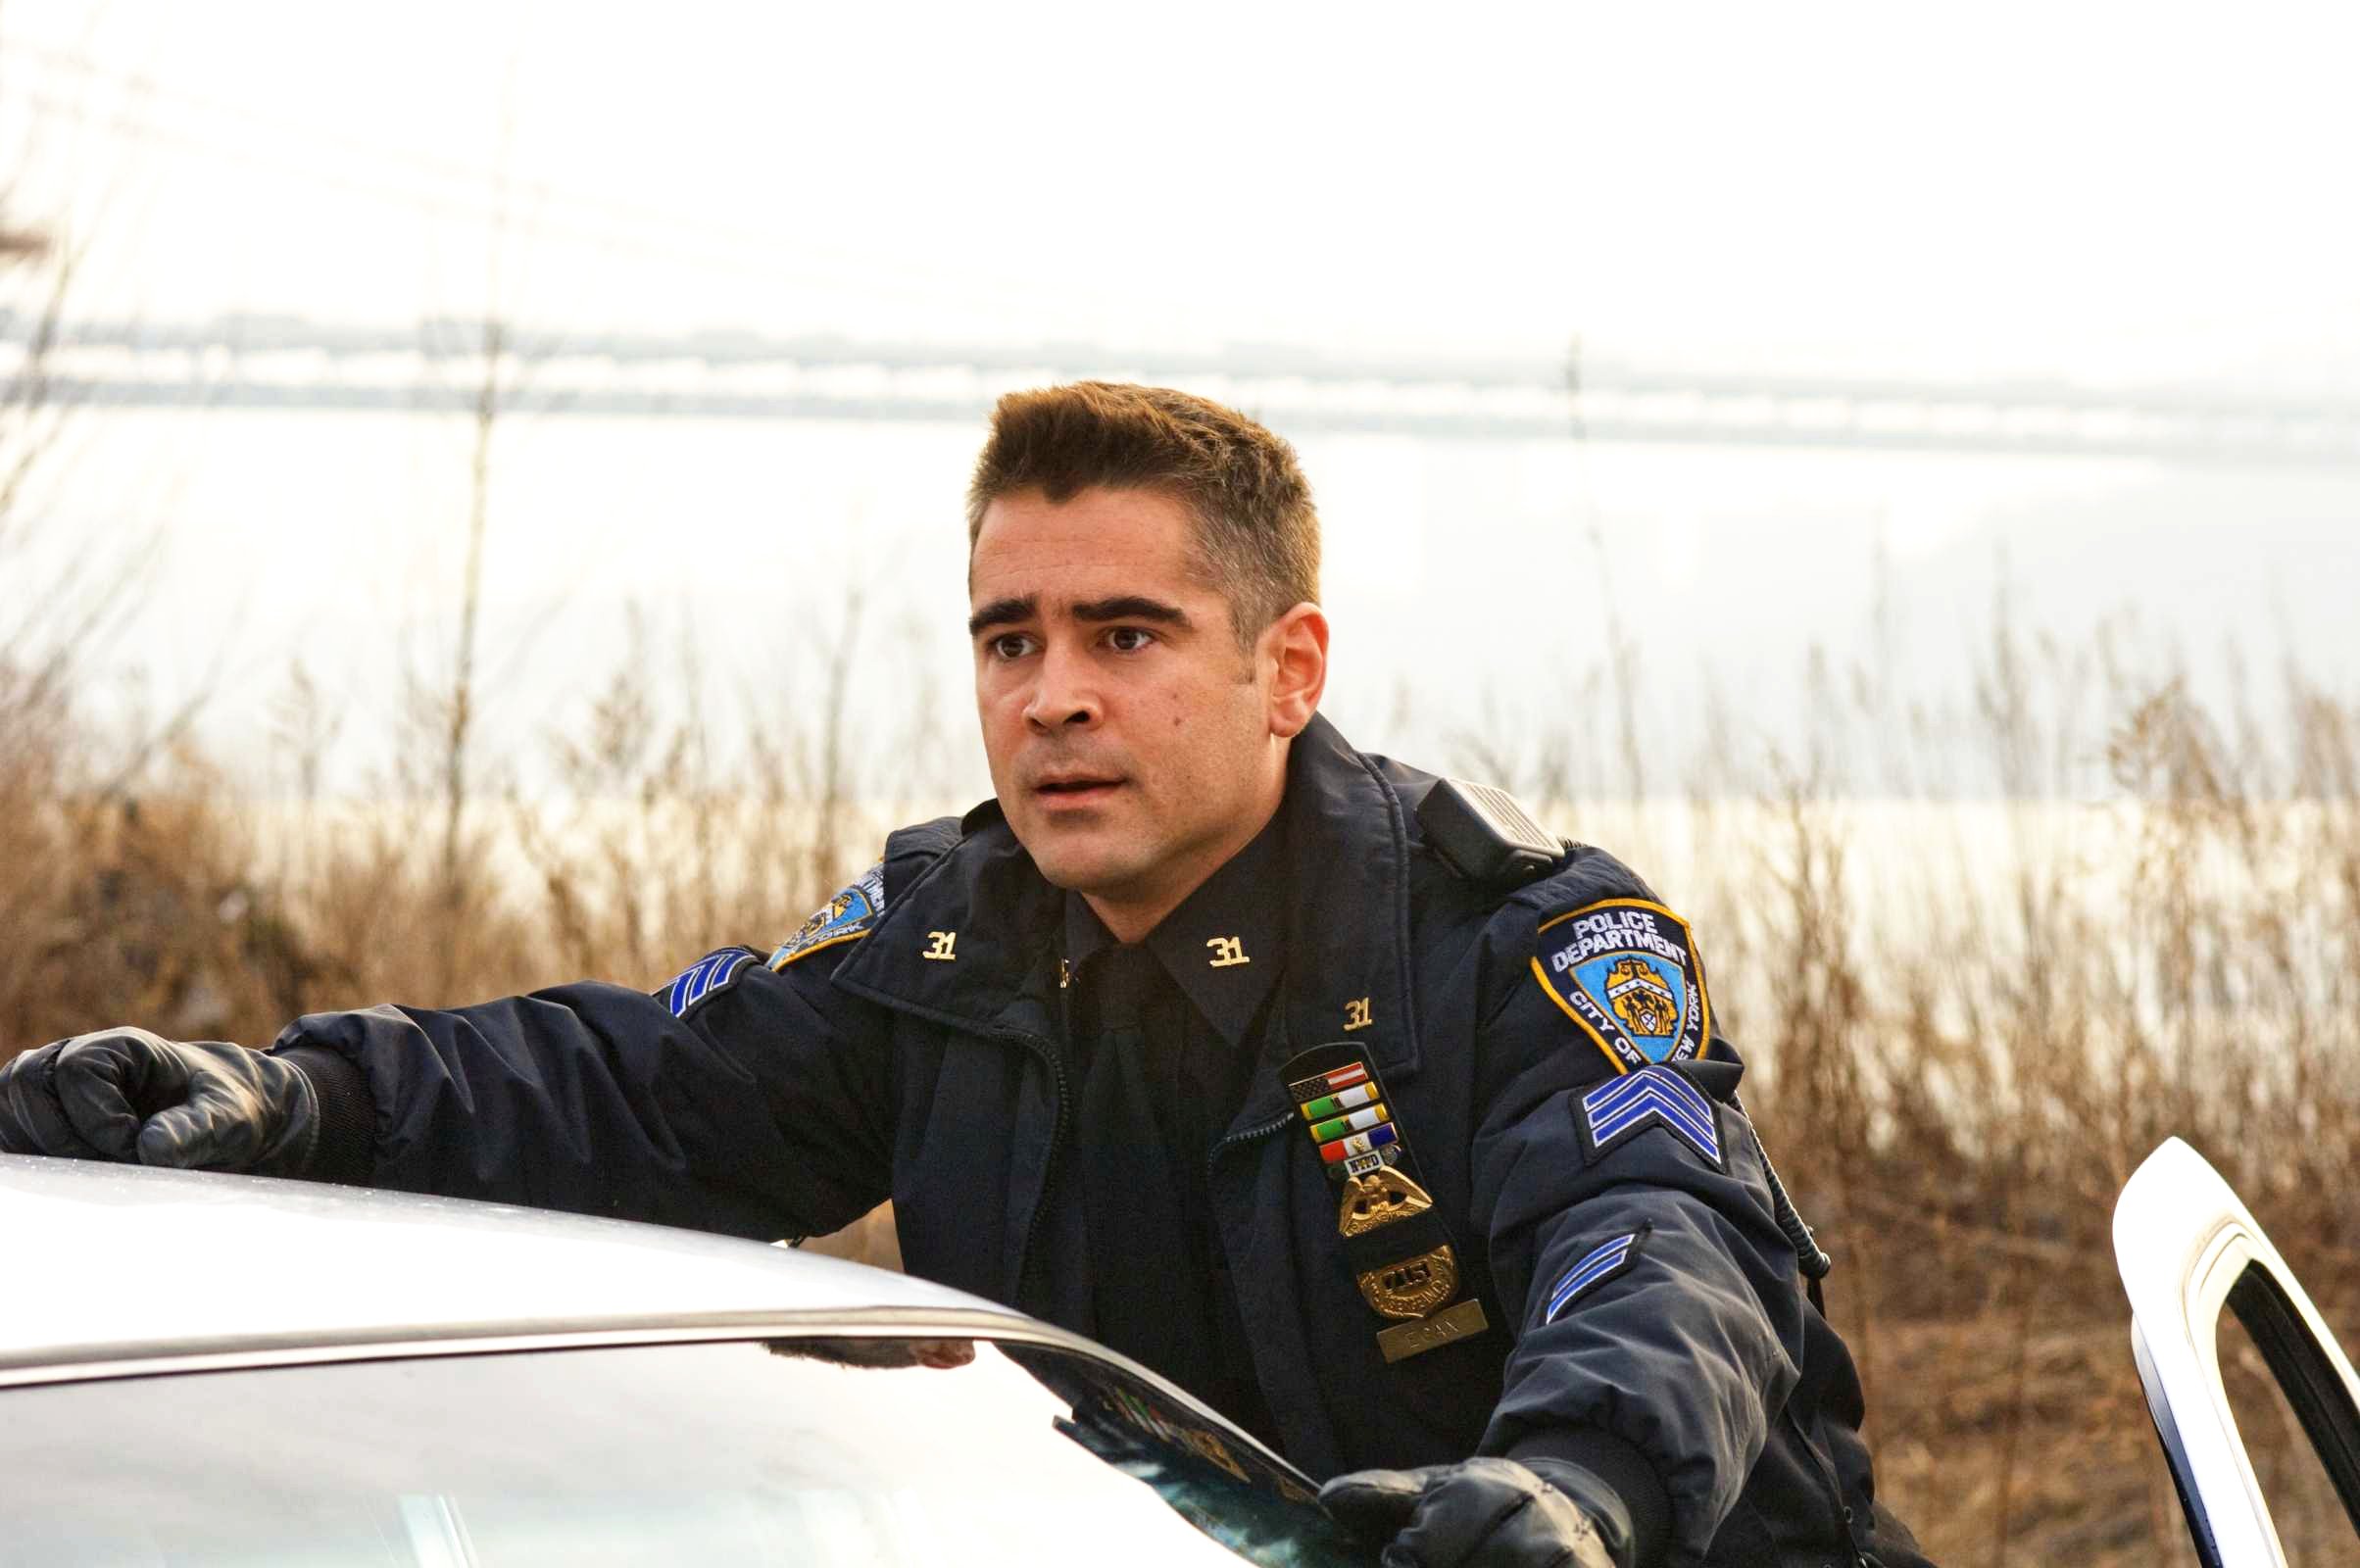 Colin Farrell stars as Jimmy Egan in New Line Cinema's Pride and Glory (2008). Photo credit by Glen Wilson.